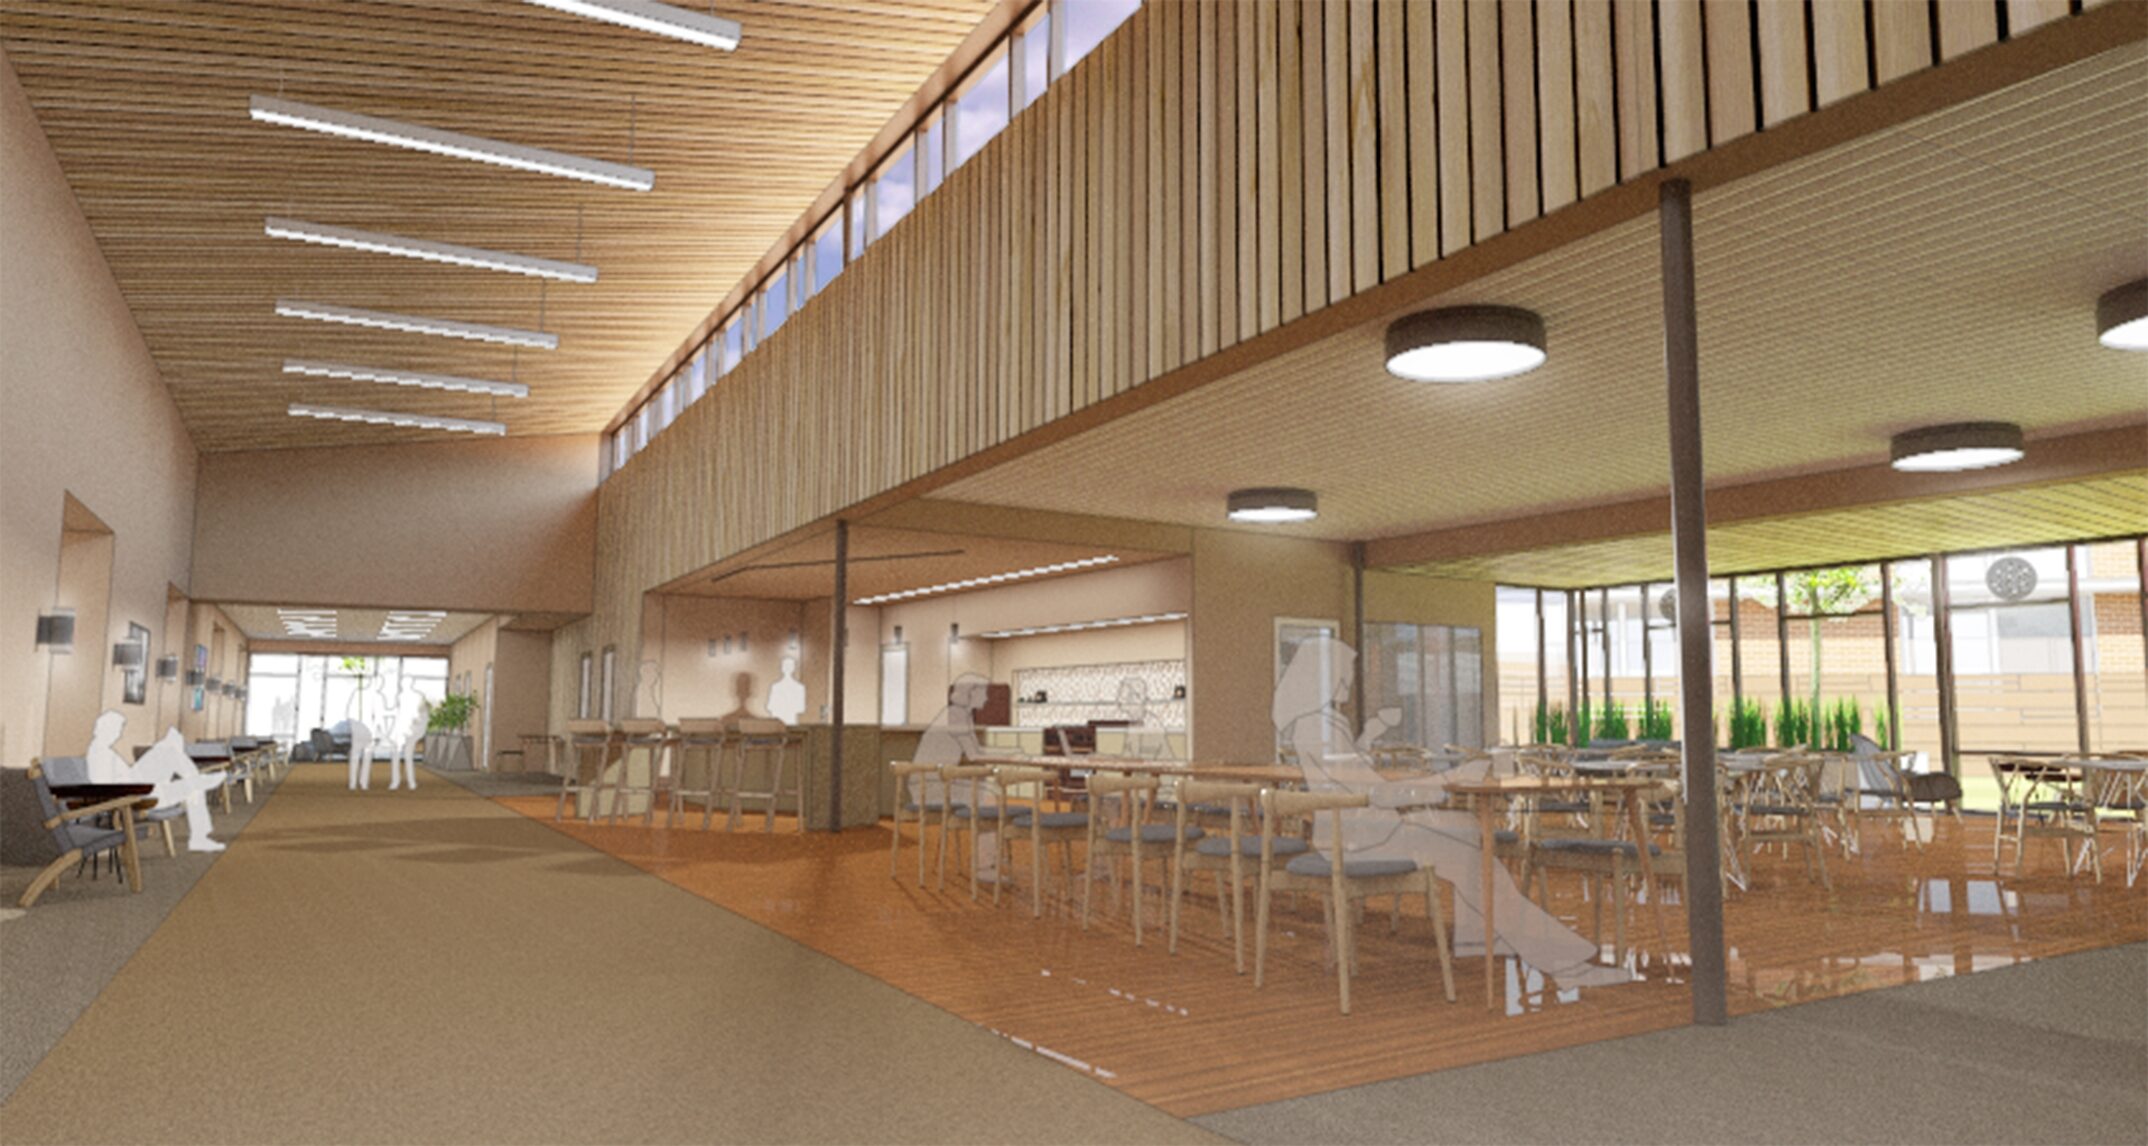 At Riverview Retirement Community’s memory care addition, all
resident rooms open onto a large living/dining/activity space. This shared area
was designed to support continuous circulation, which encourages interaction
among community members and decreases chances of a wandering resident getting
lost. – NAC